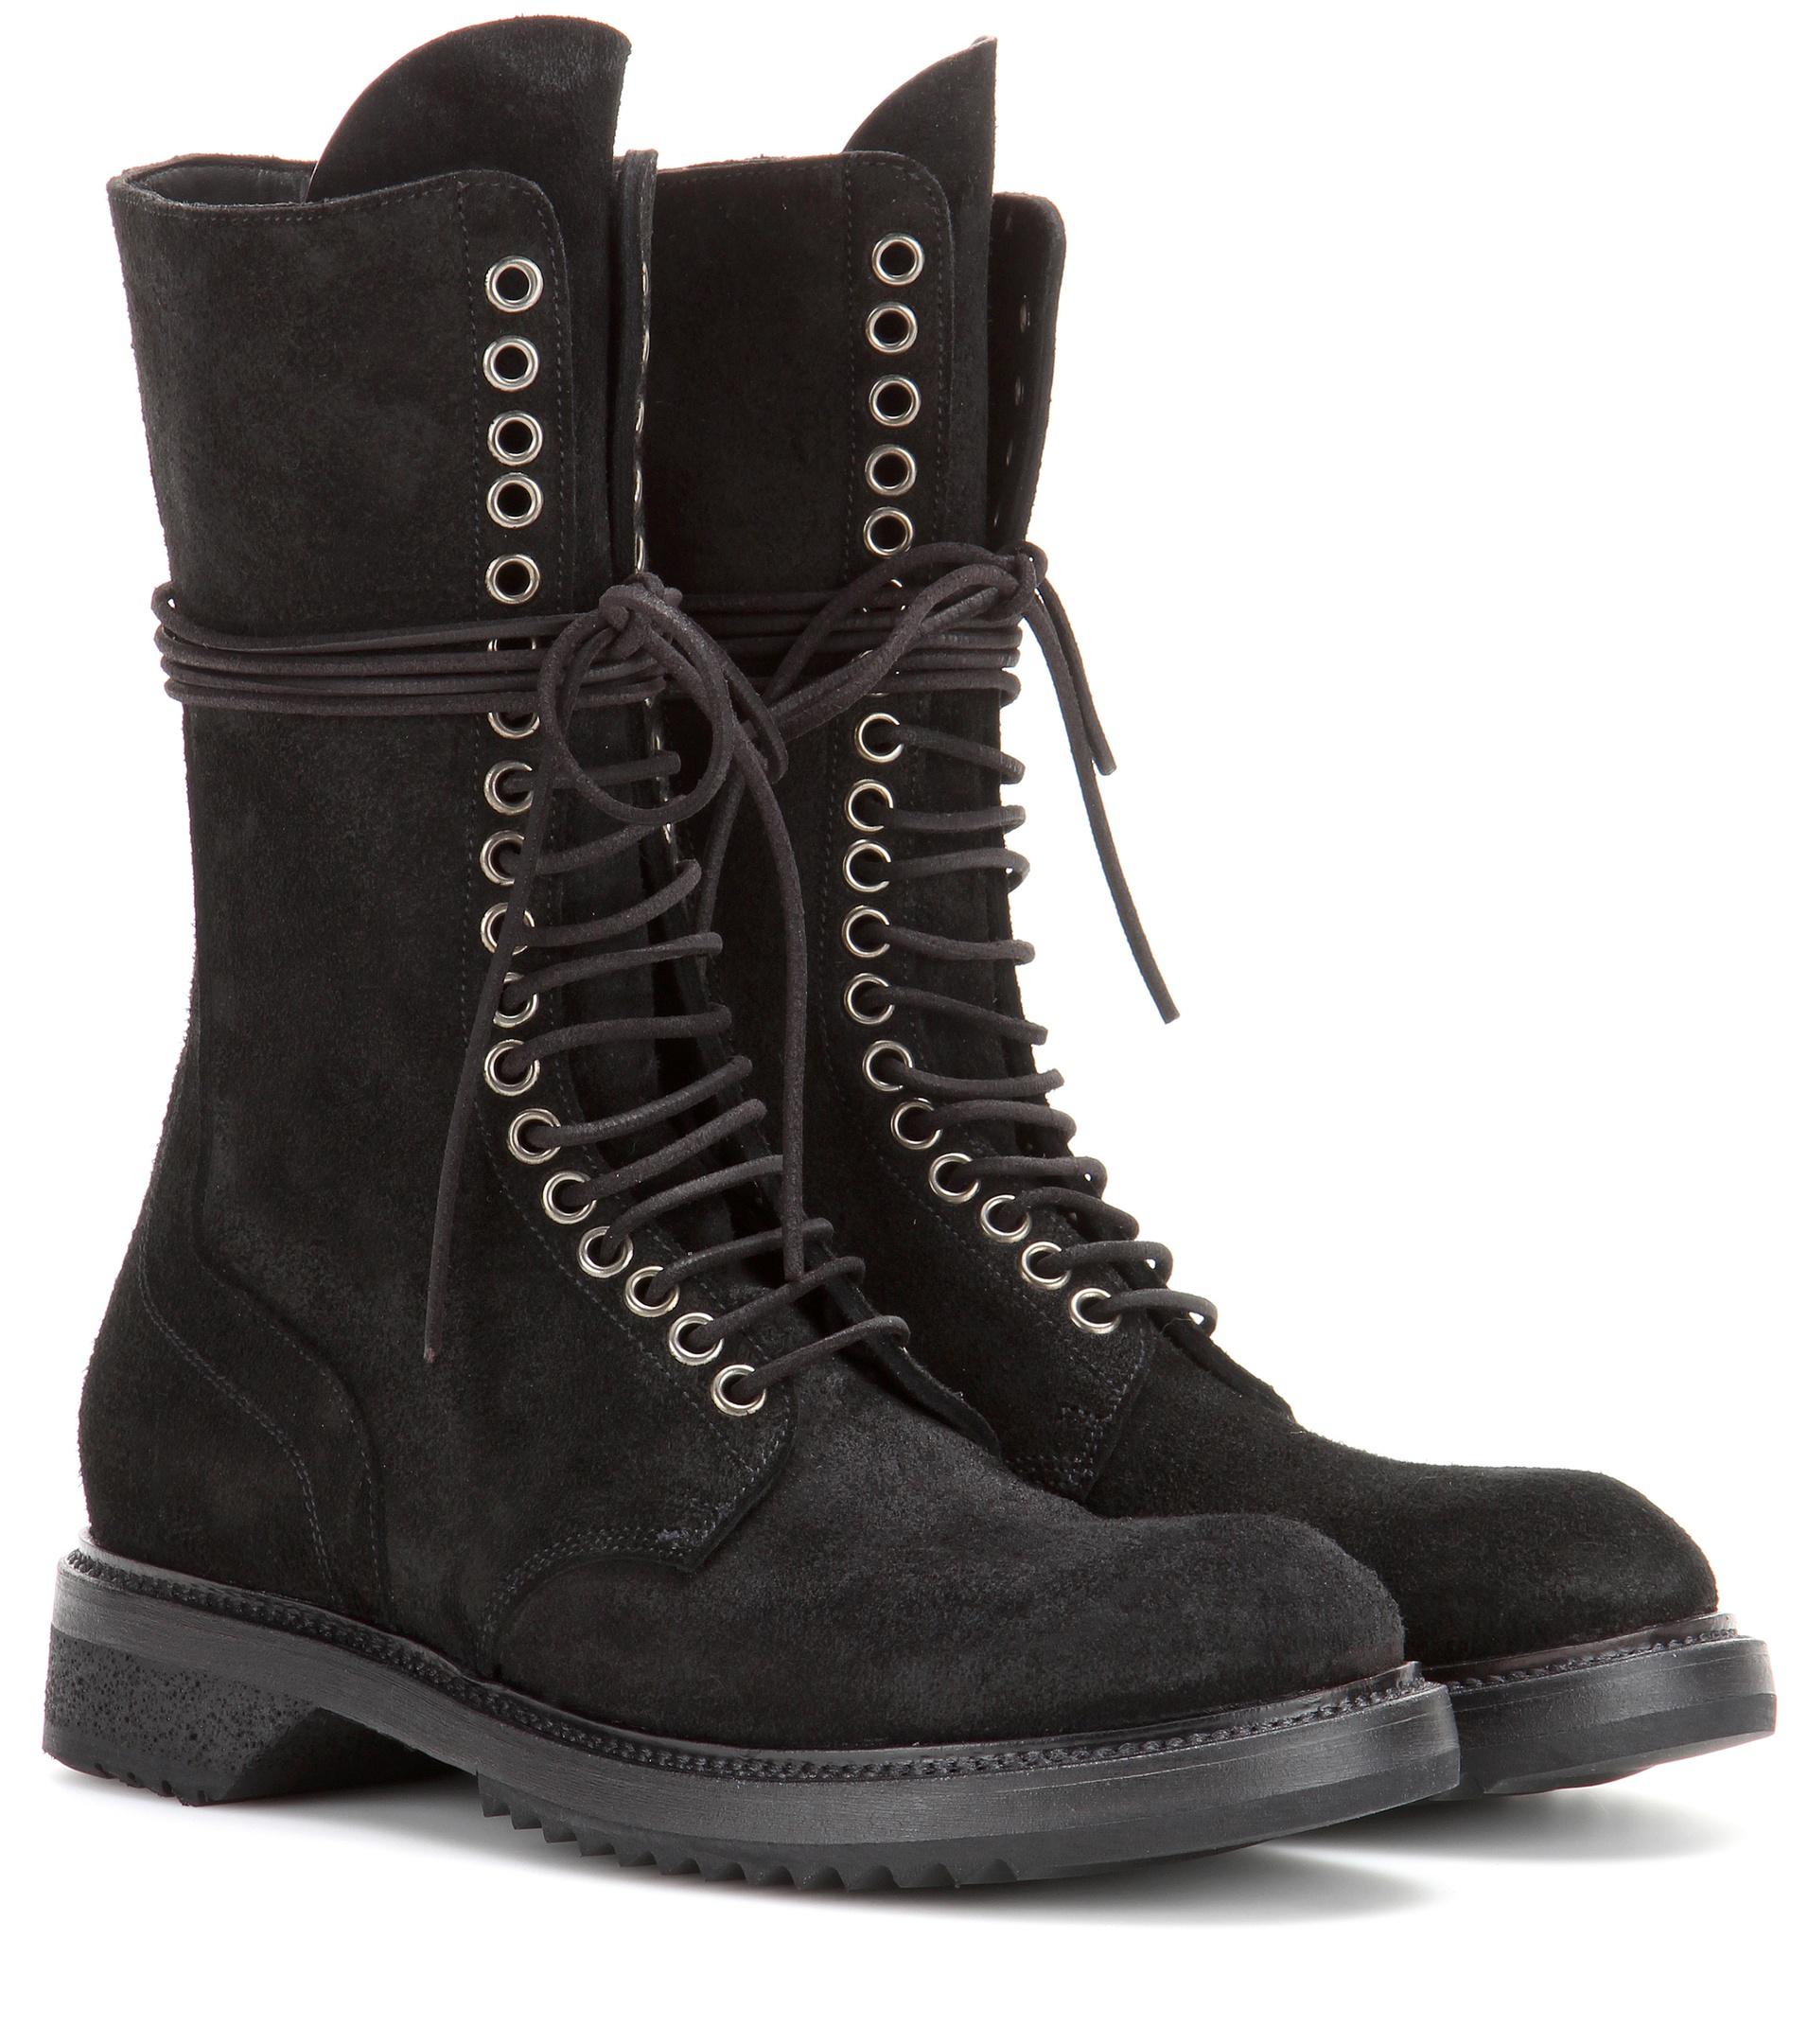 Rick Owens Army Suede Boots in Black - Lyst